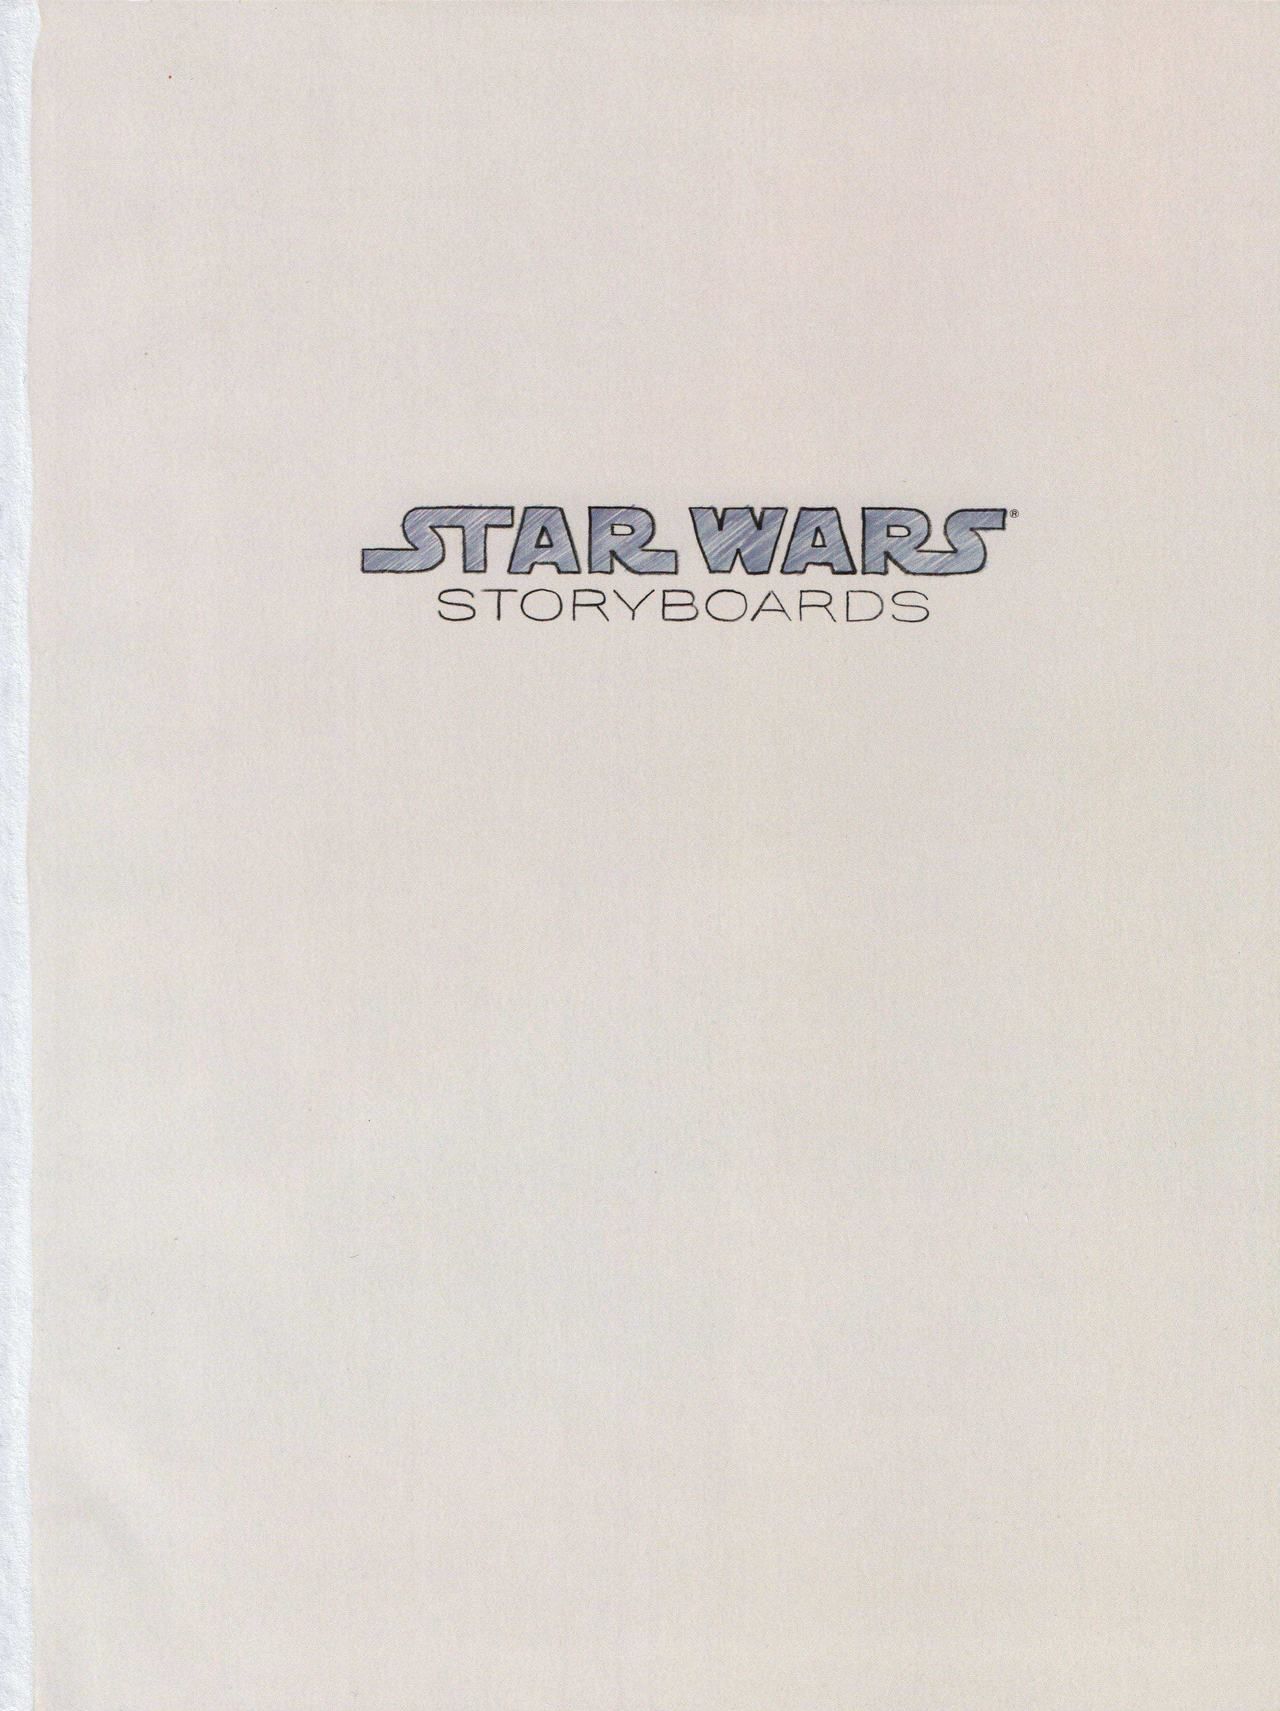 Star Wars Storyboards - The Prequel Trilogy 4